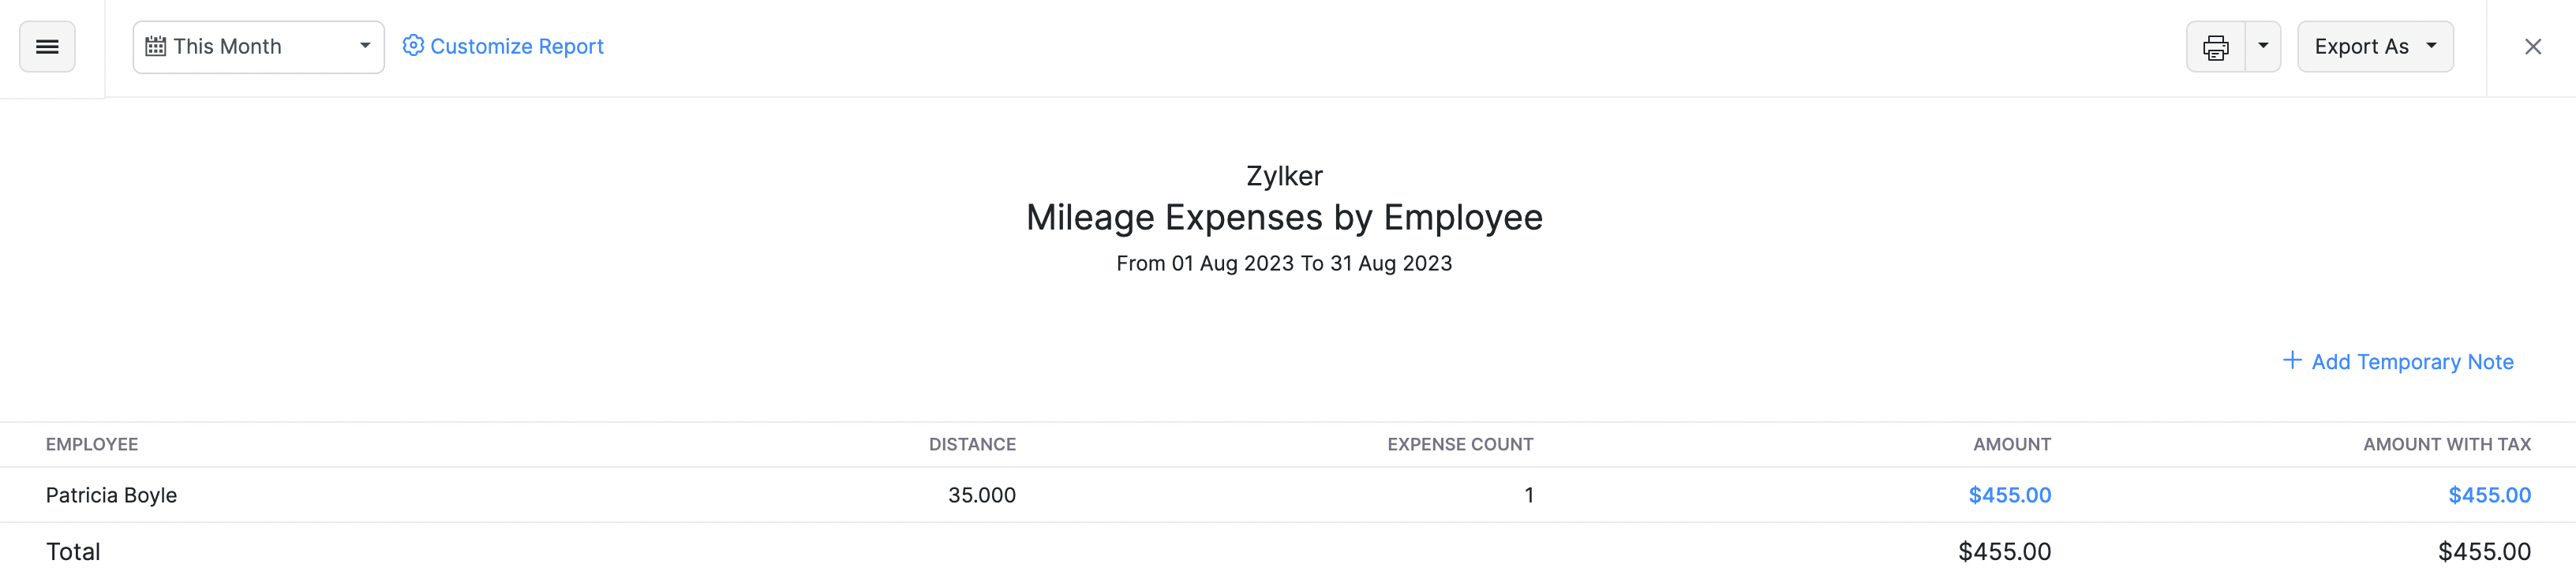 Expense by Employee Mileage Report